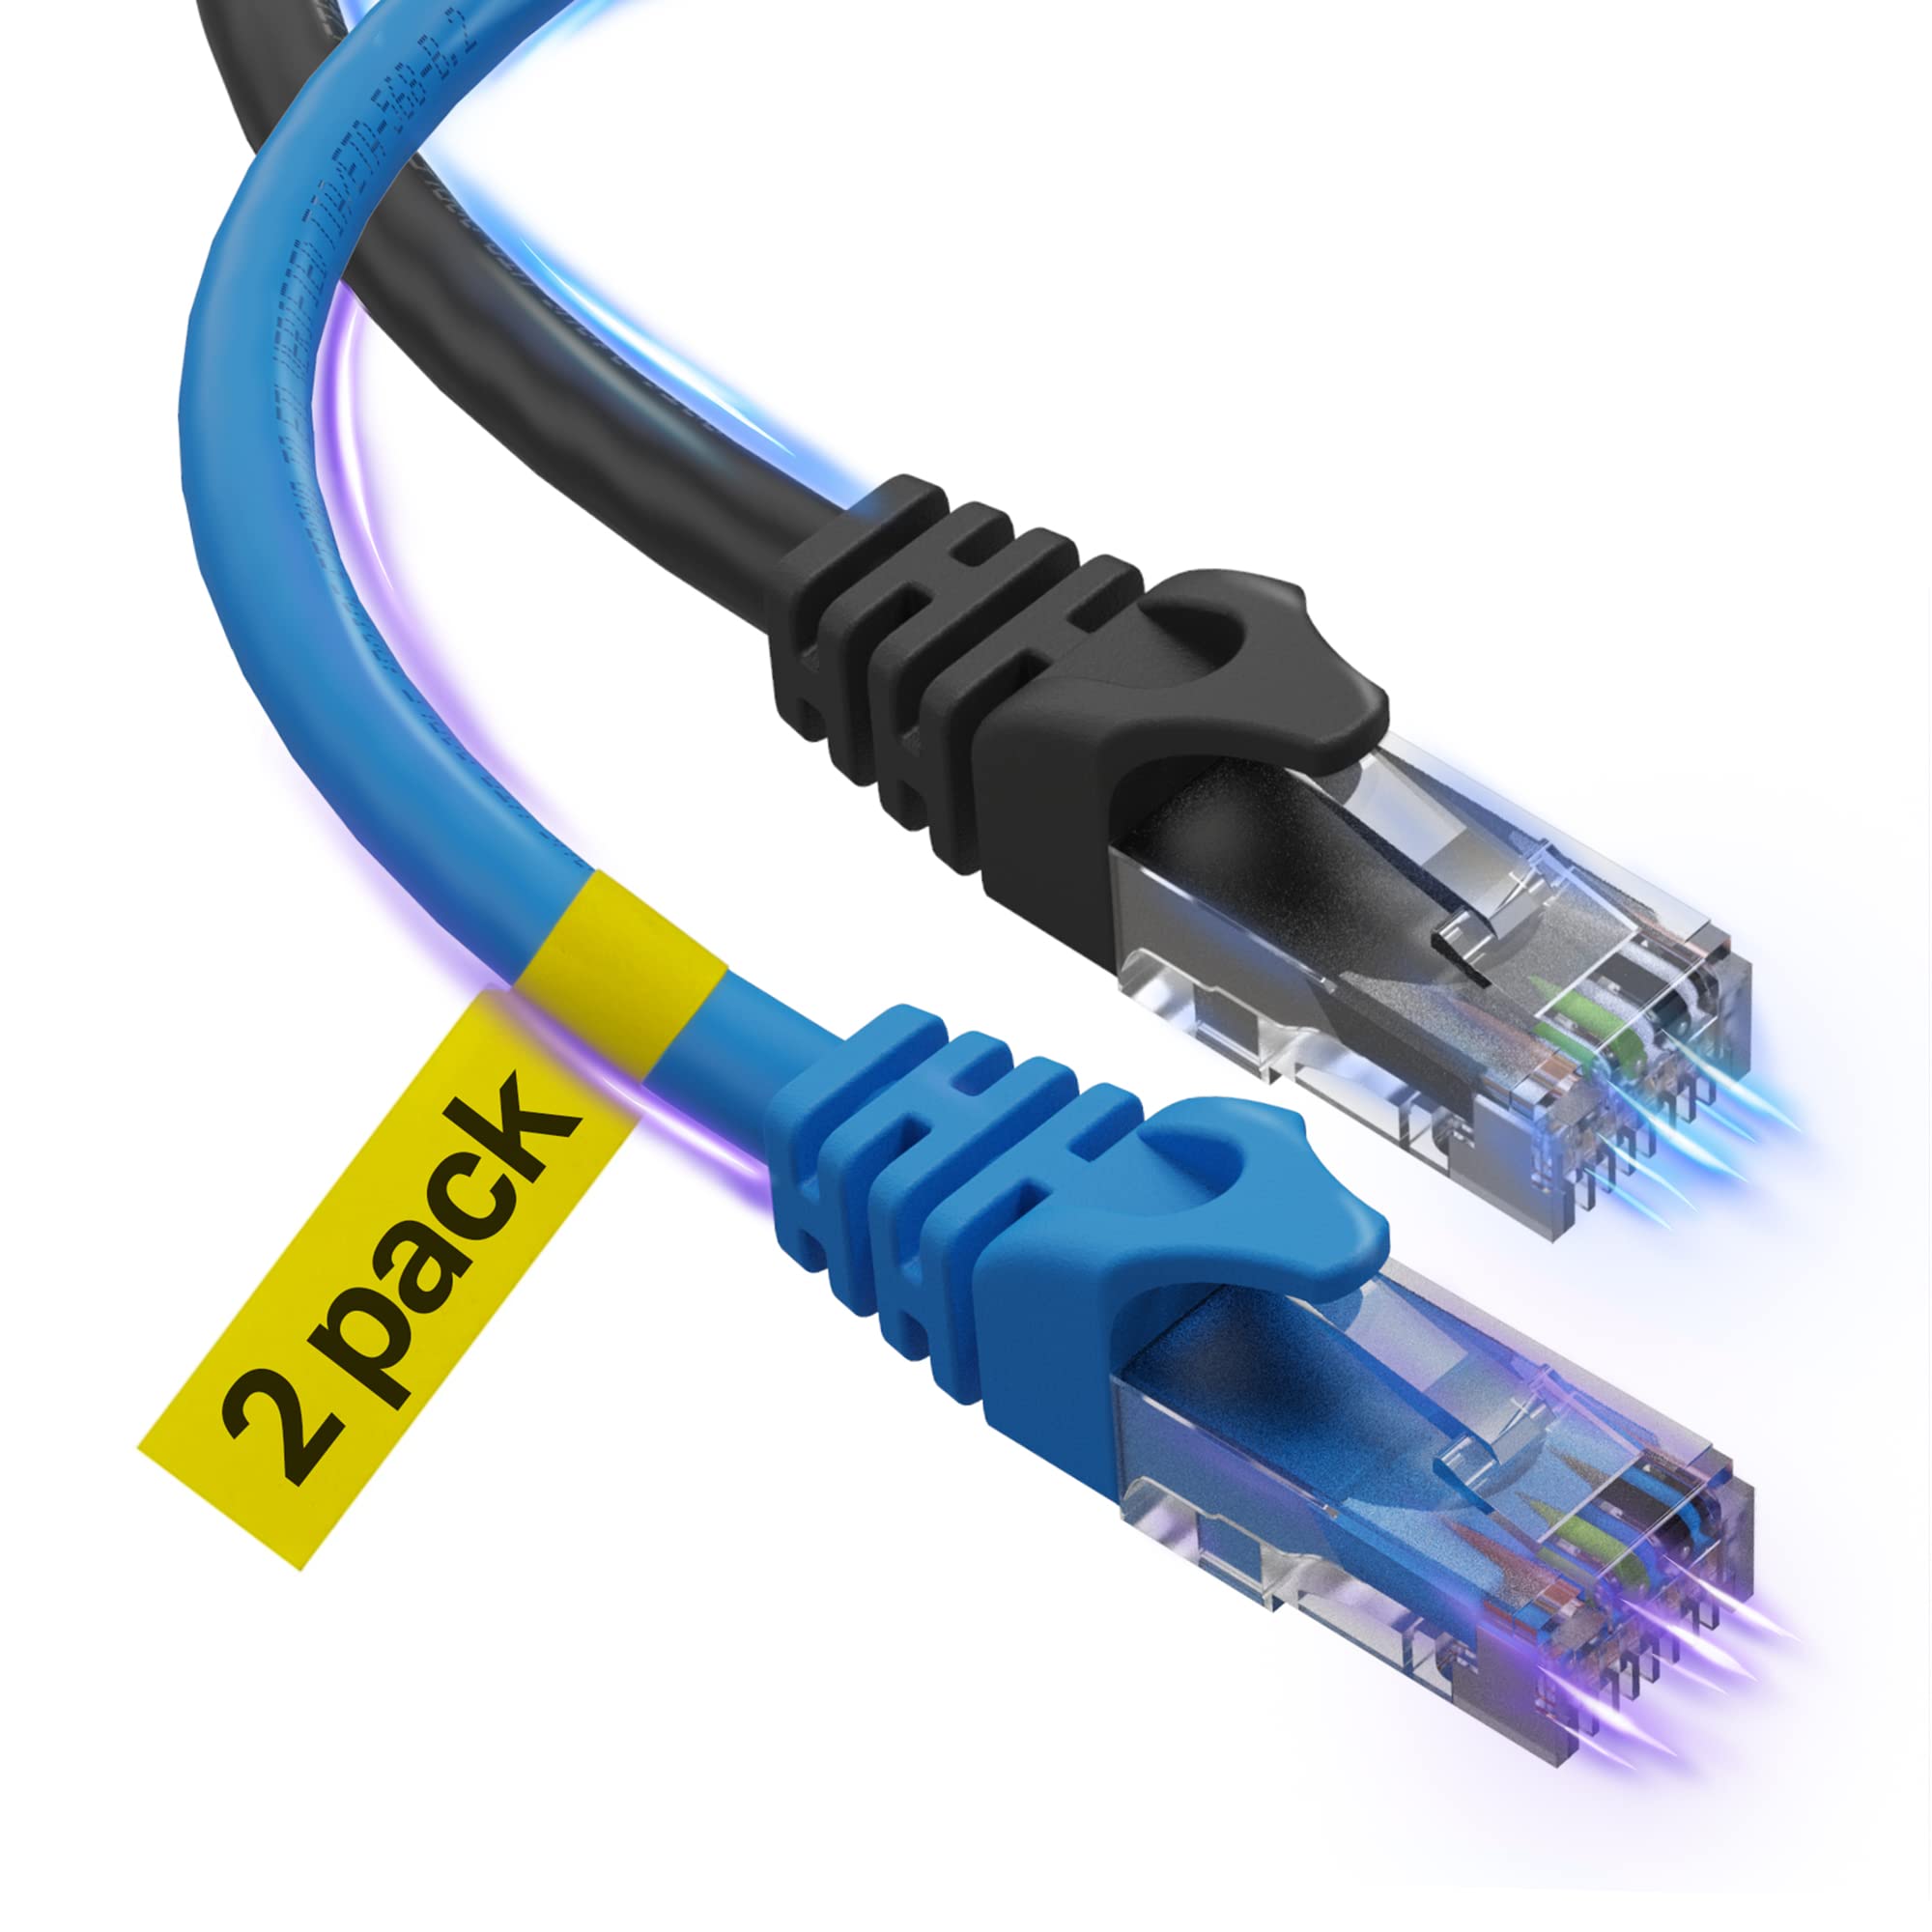 If using a device with an Ethernet port, connect it to your router using an Ethernet cable.
Ensure a stable and high-speed internet connection.